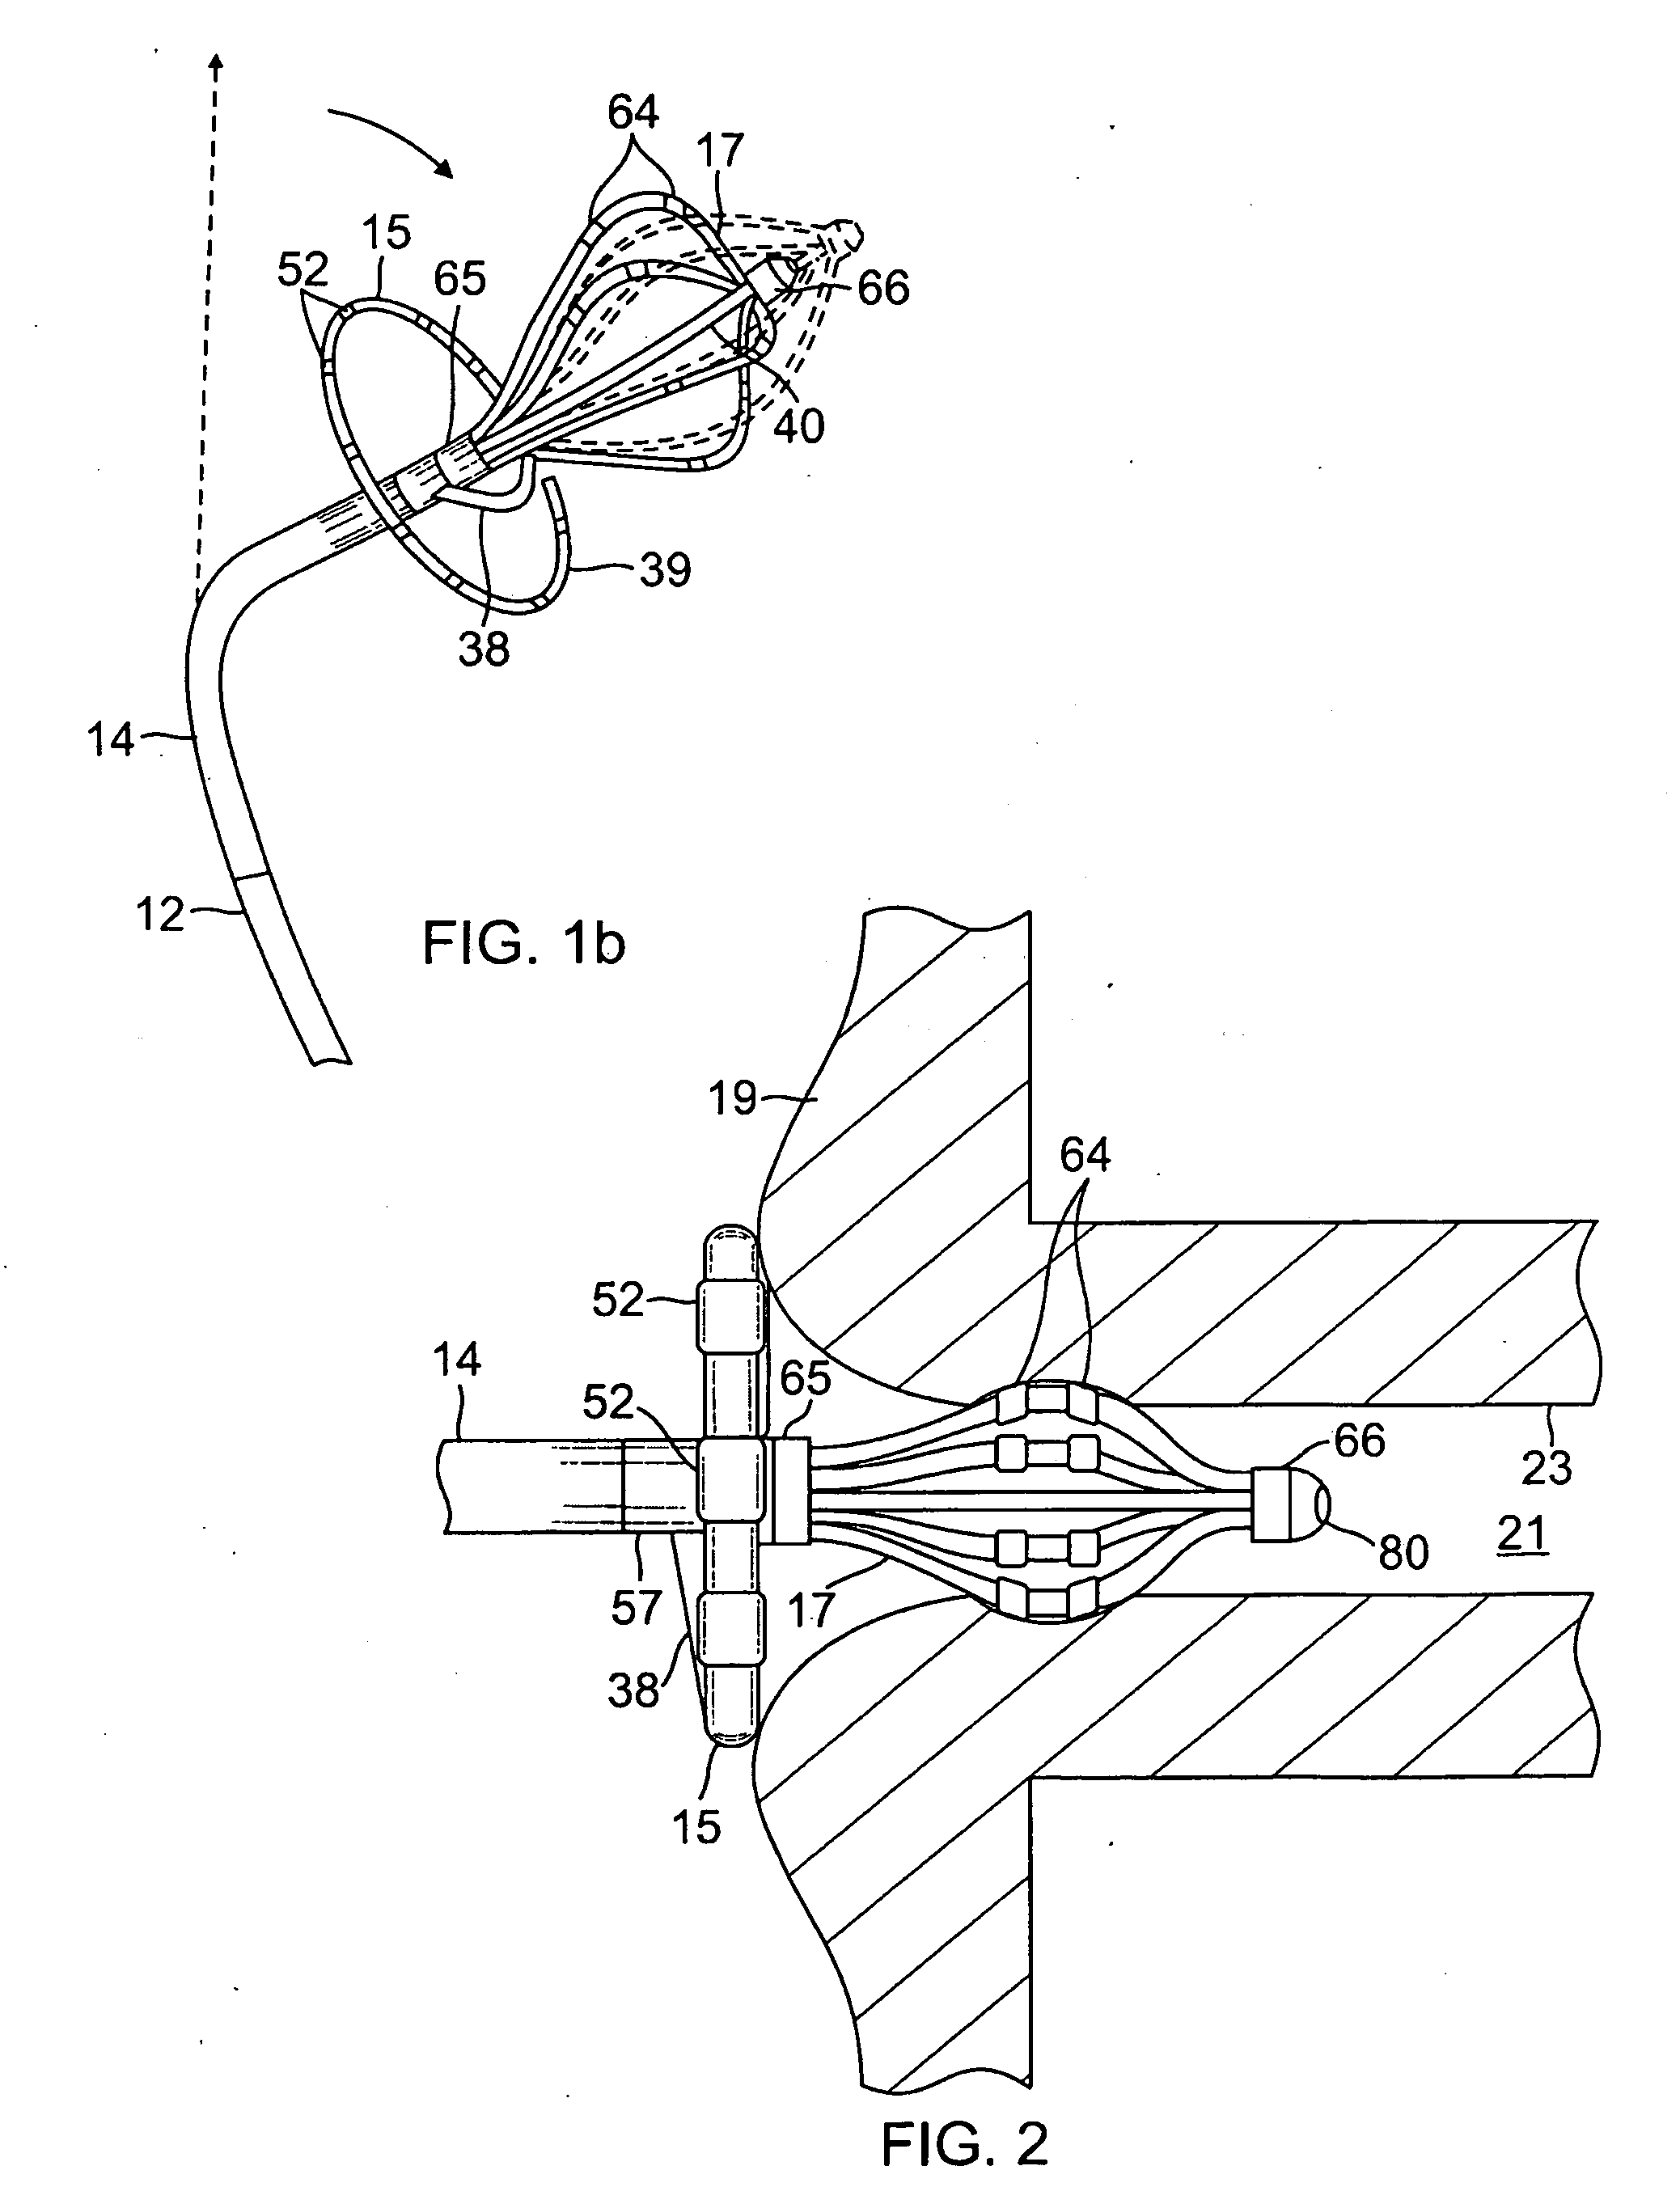 Catheter with multiple electrode assemblies for use at or near tubular regions of the heart